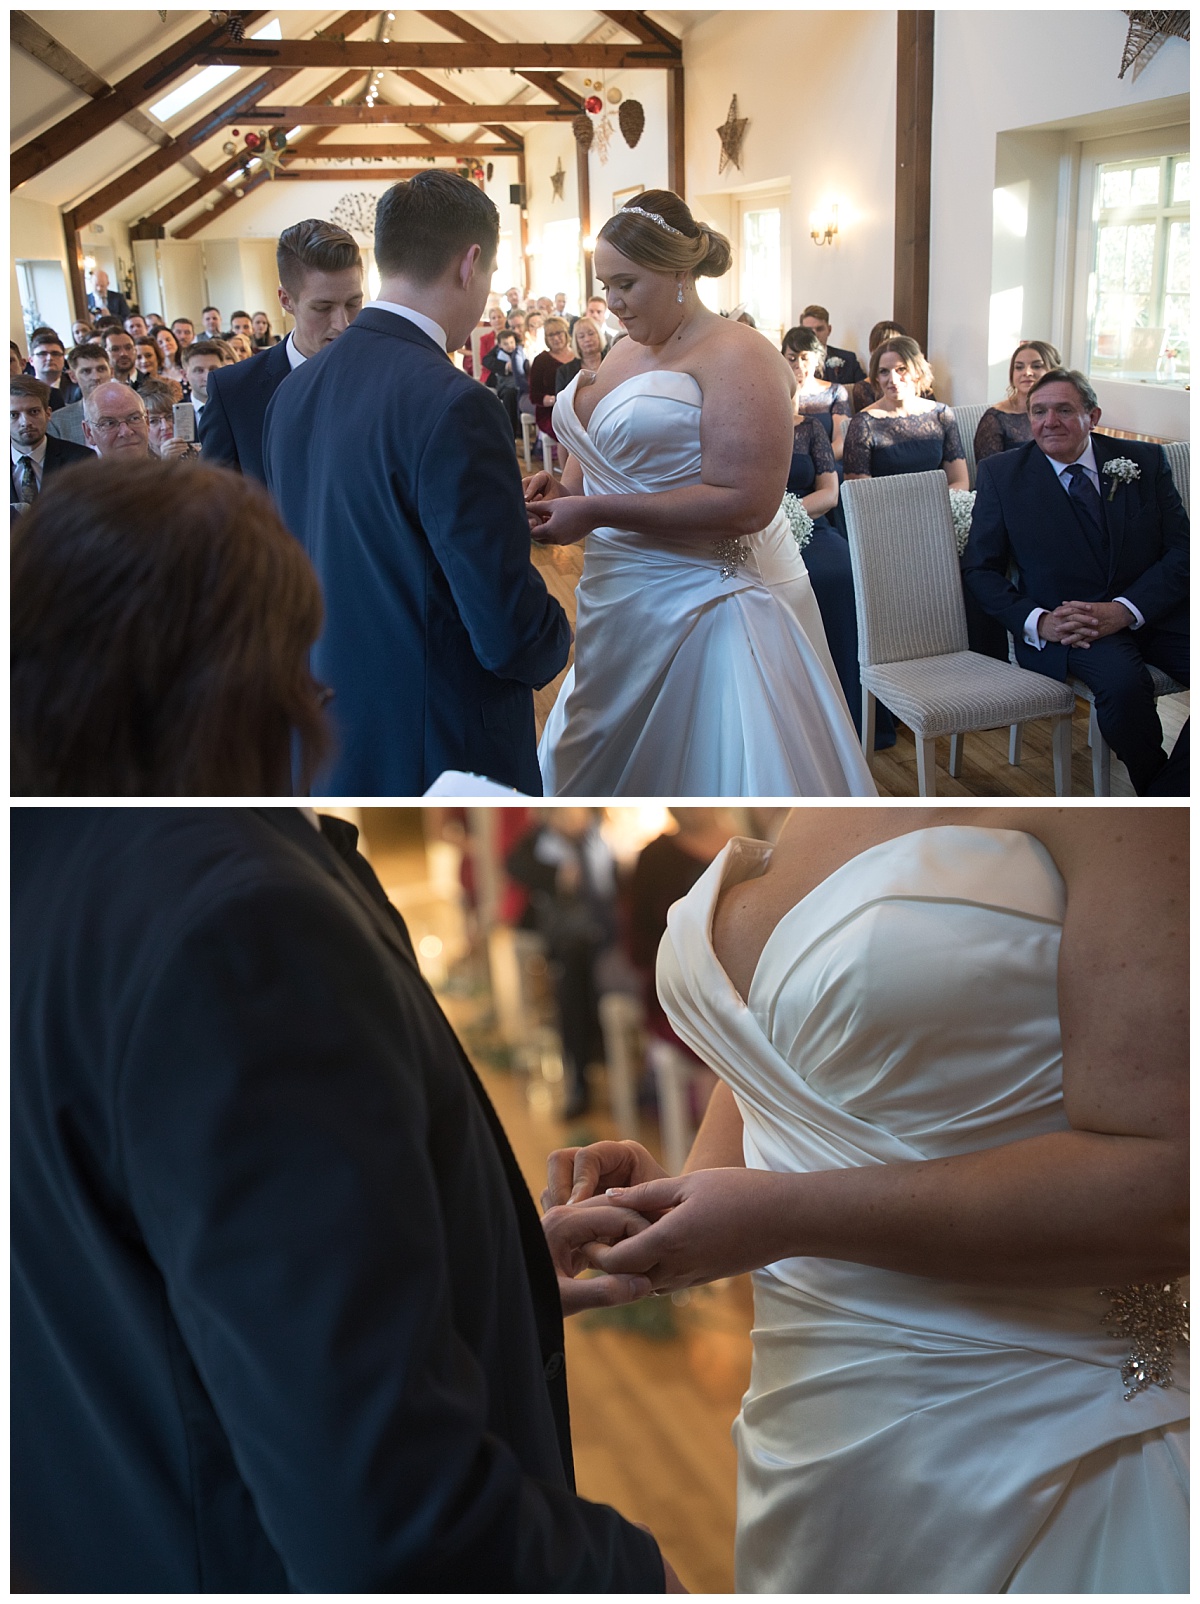 Wedding Photography Manchester - Lorna and Vinny's Abbeywood Estate and Gardens Wedding 50